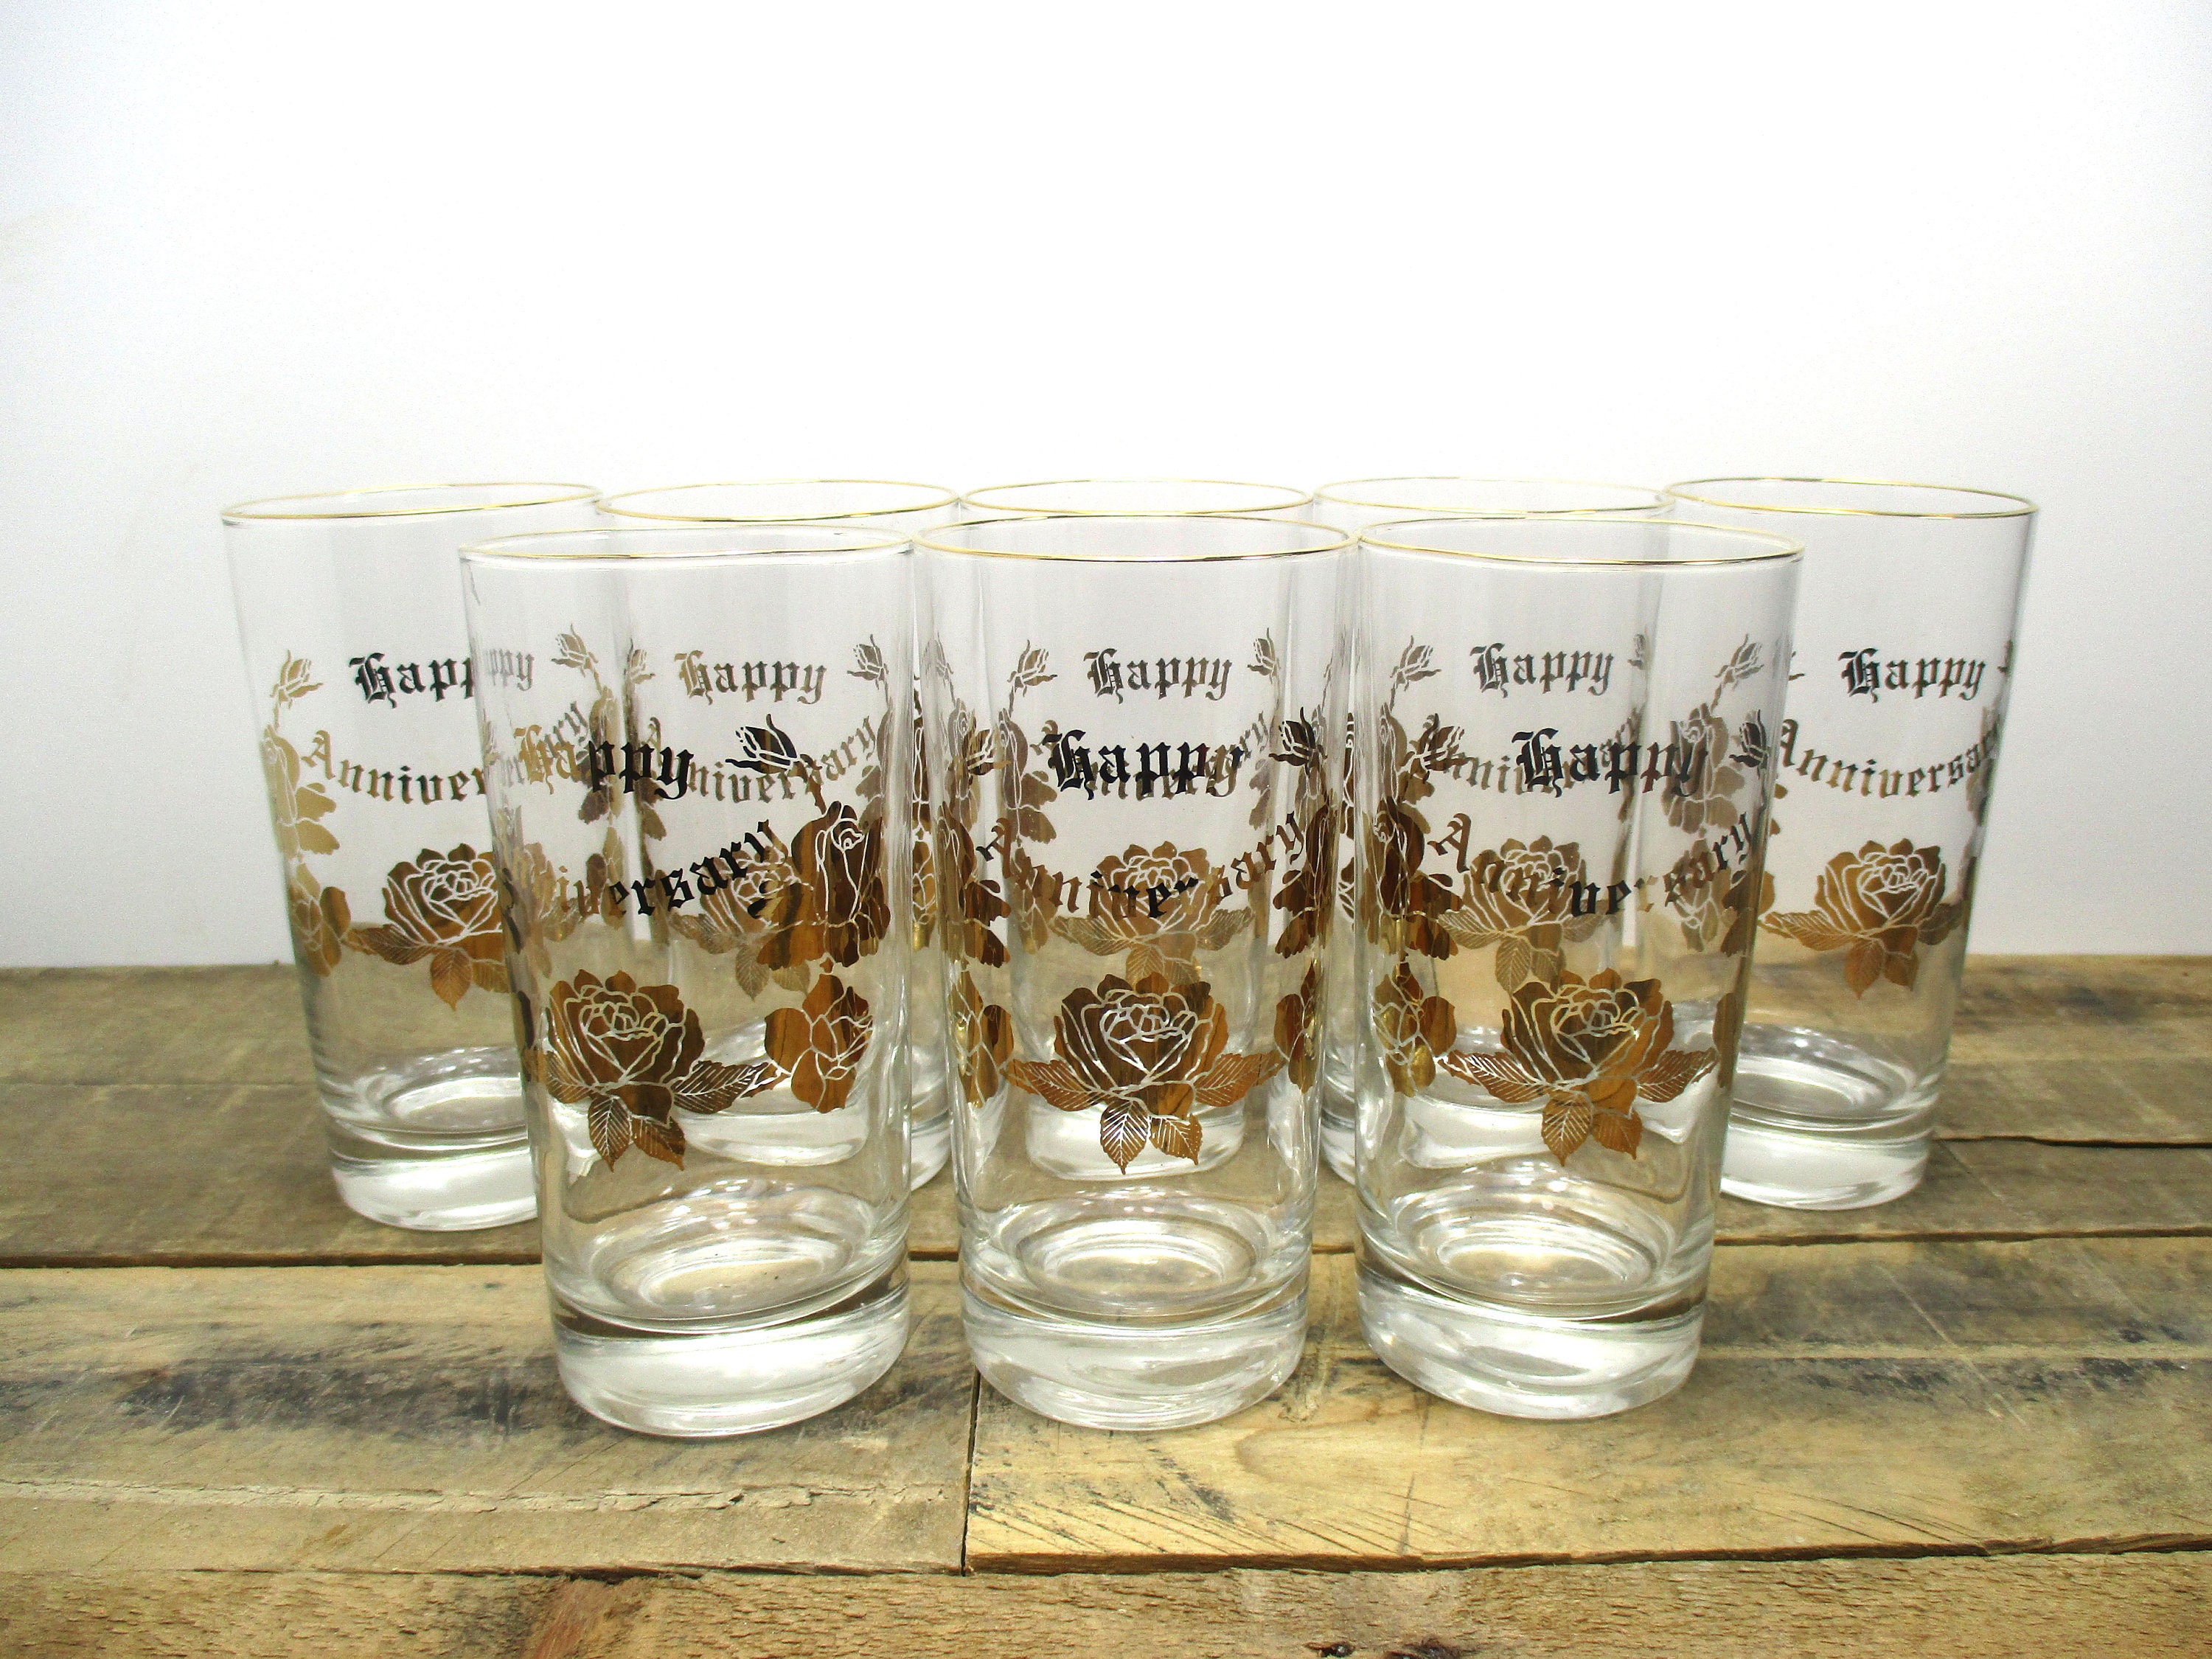 FULL SET of 8 Vintage Anniversary Glasses 8 Tall Drinking Glasses / Tumblers  With a Gold Gilded Design and 'happy Anniversary'. 